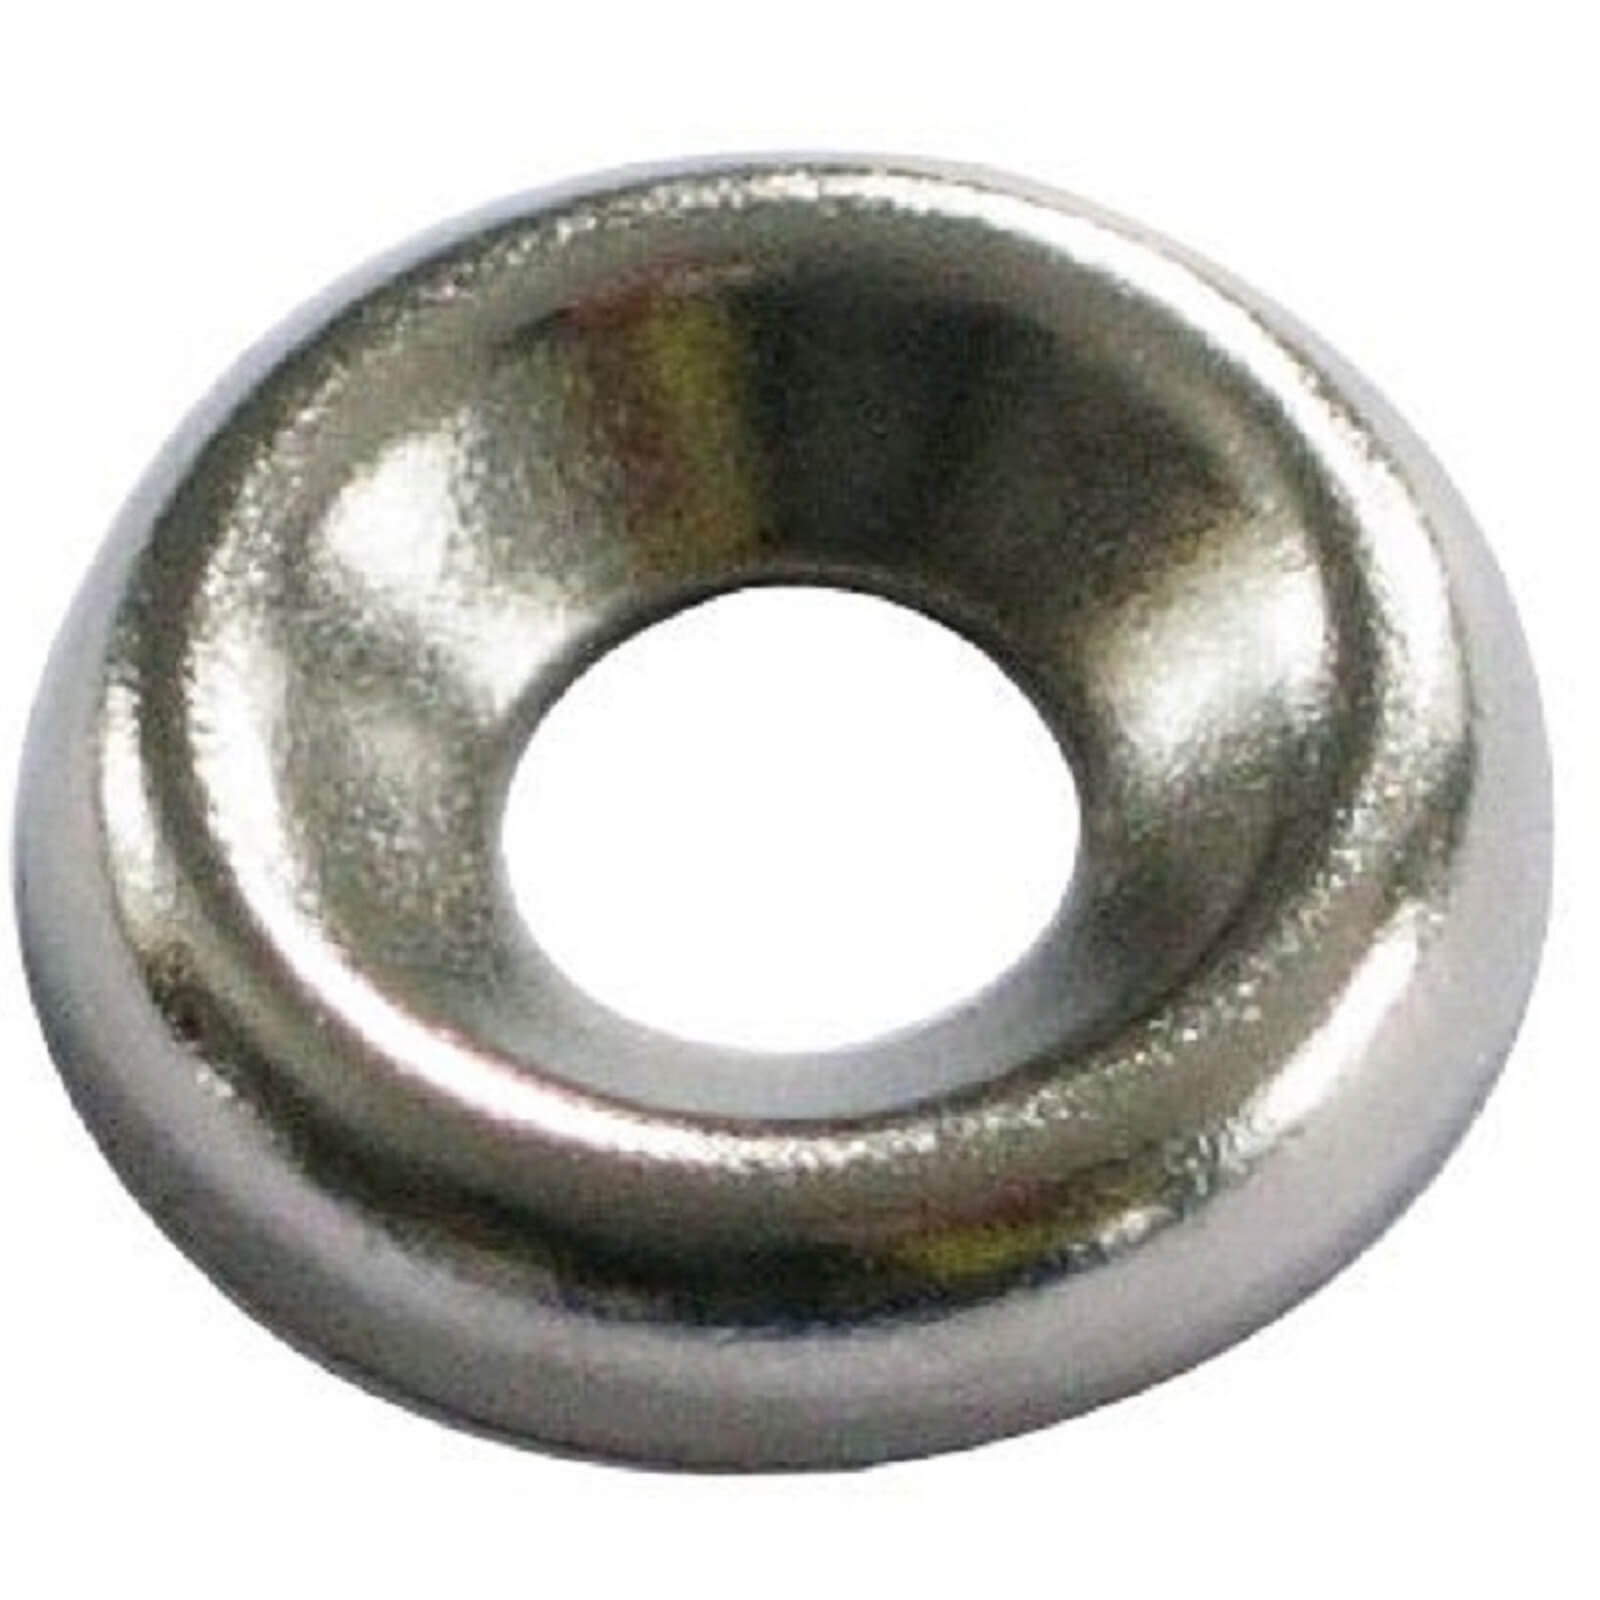 Screw Cup Washer - Nickel Plated - 3.5mm - 20 Pack